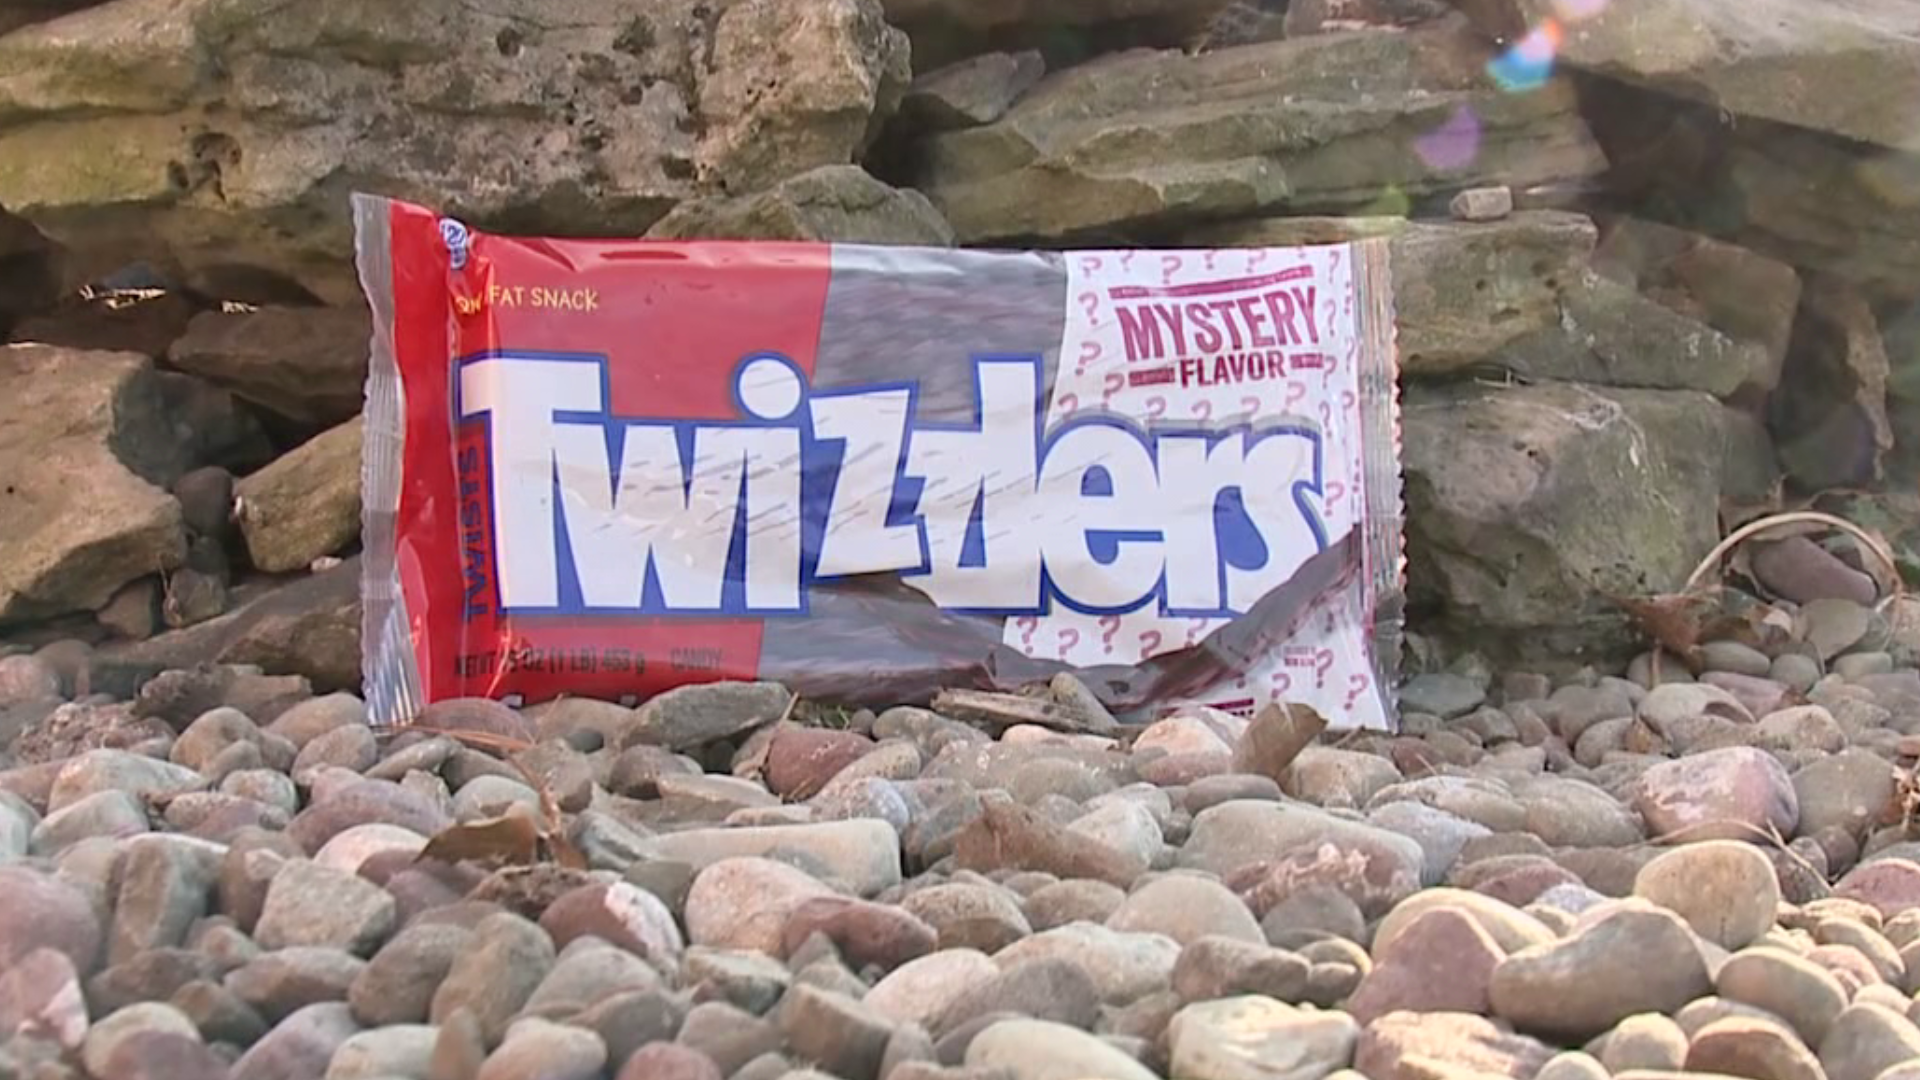 Are you ready to solve the Twizzlers mystery?